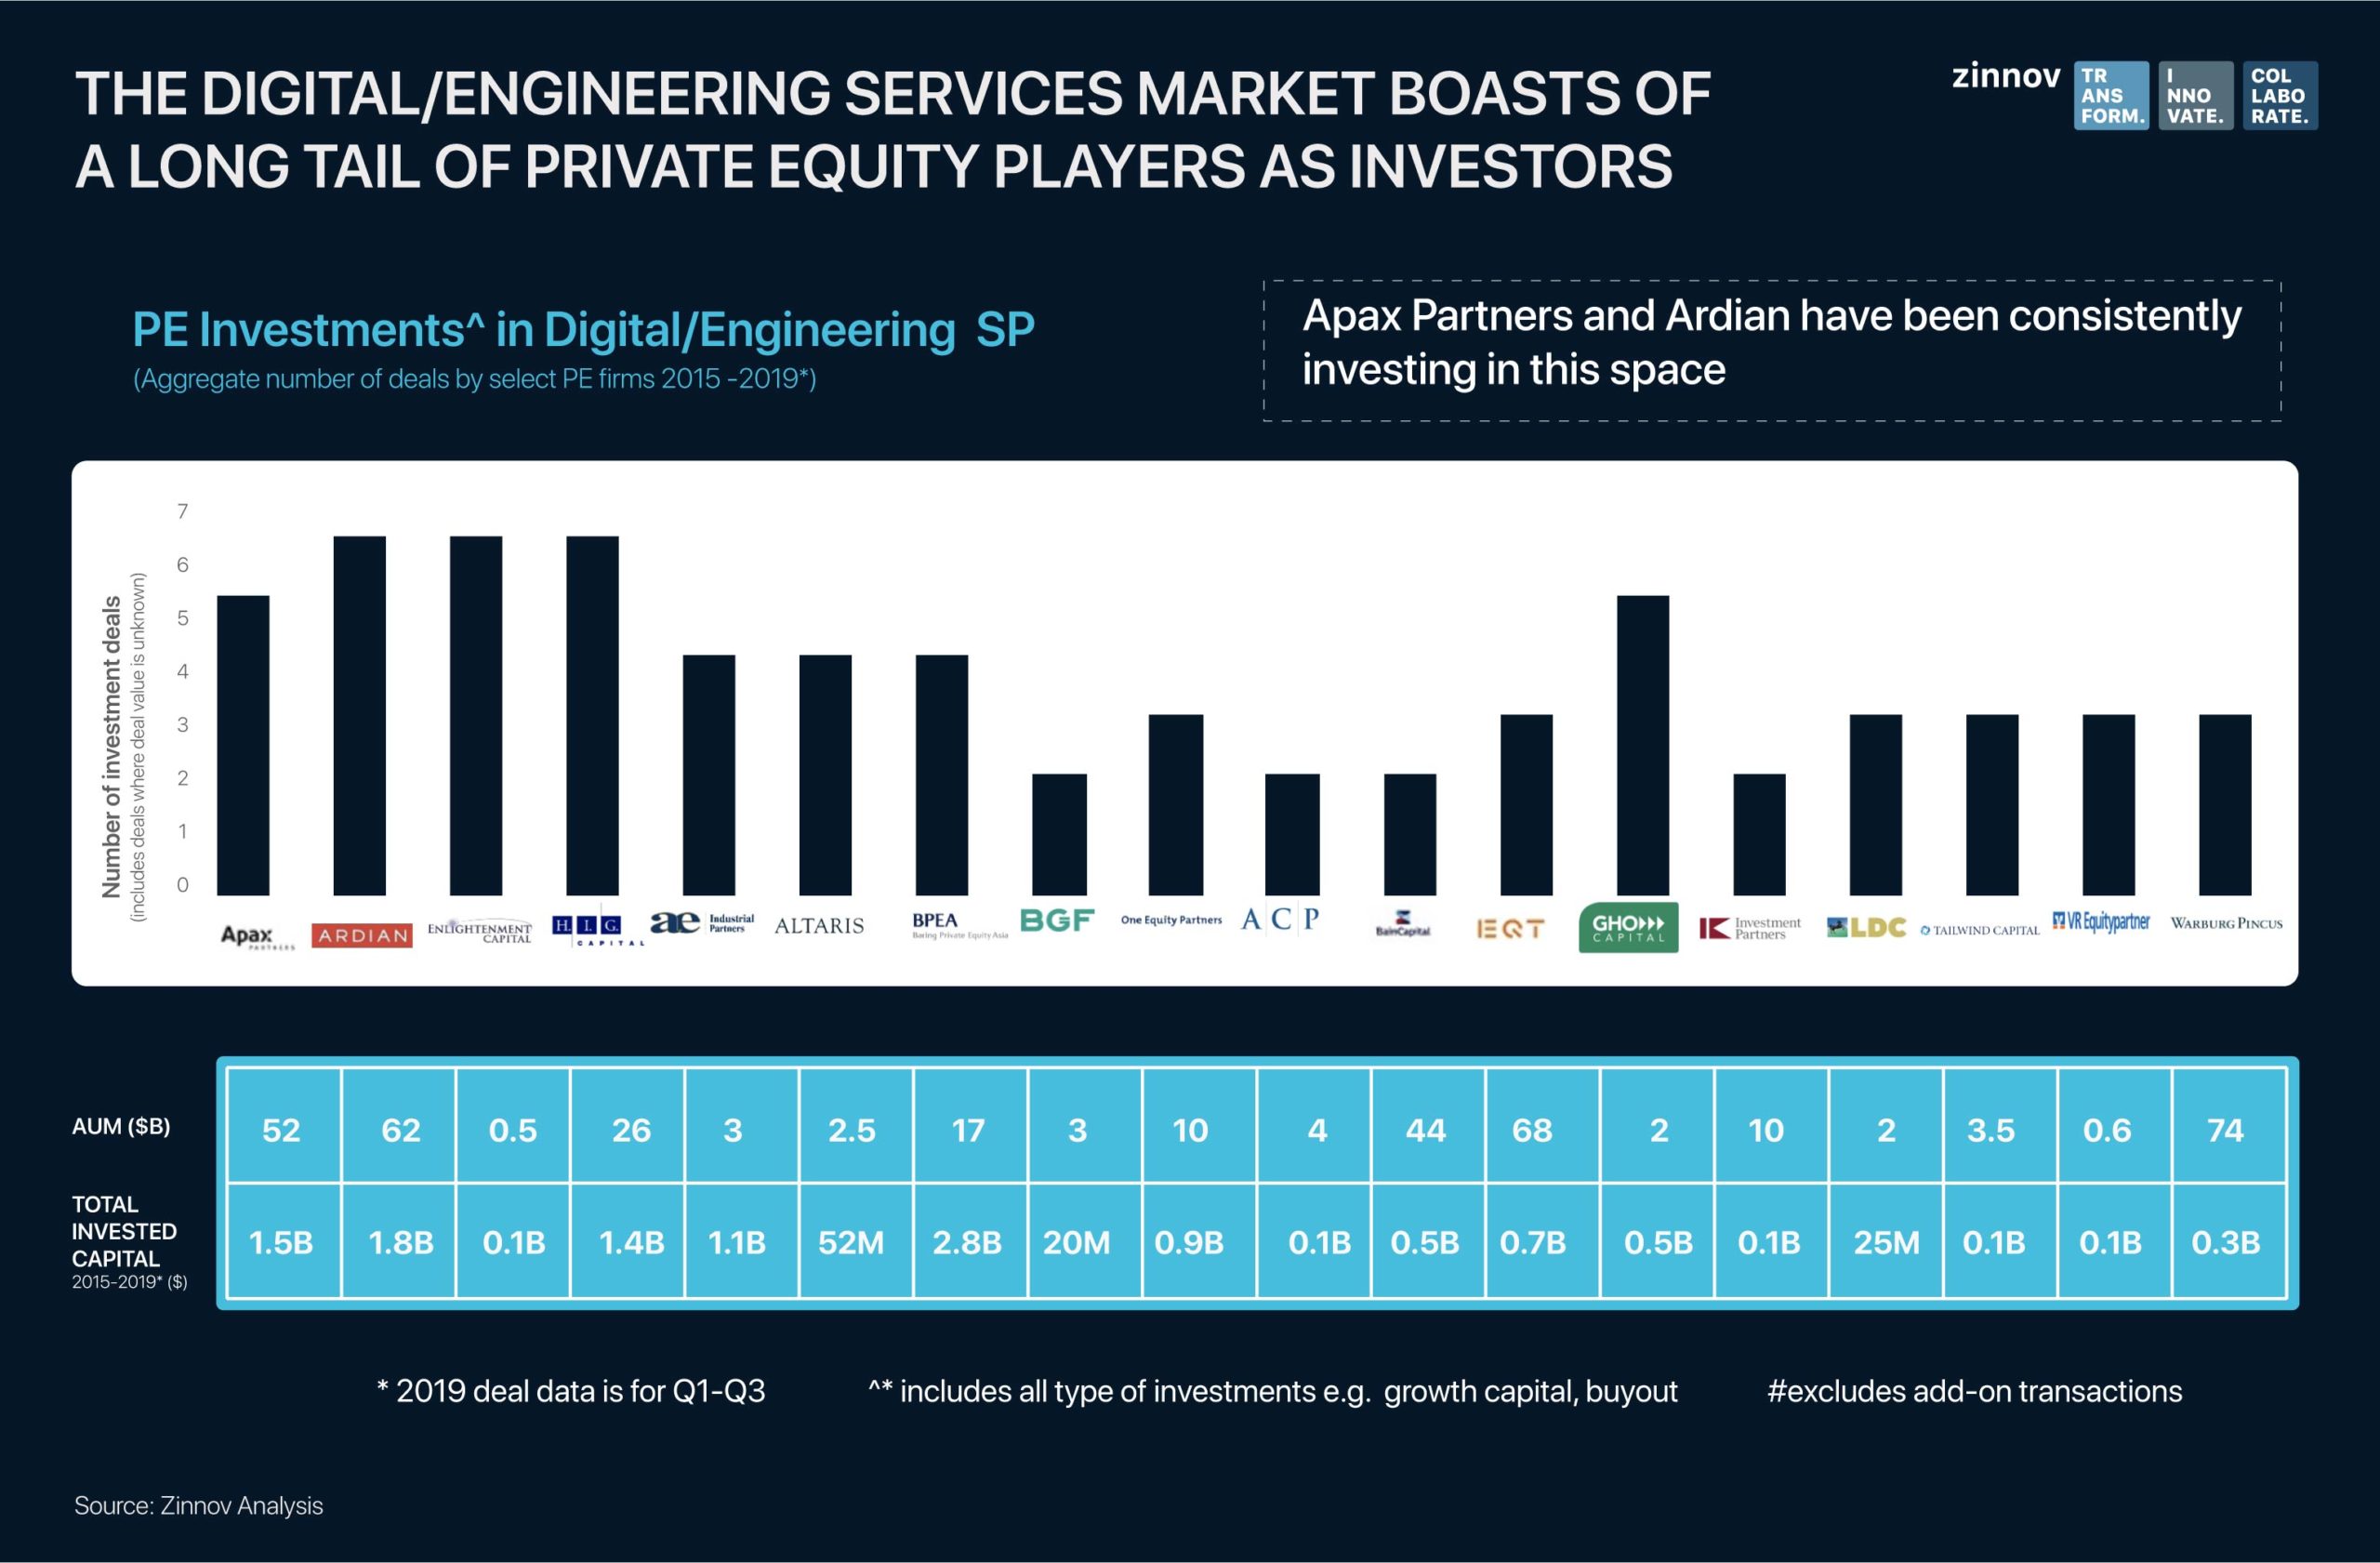 Private Equity Investments in Digital Engineering